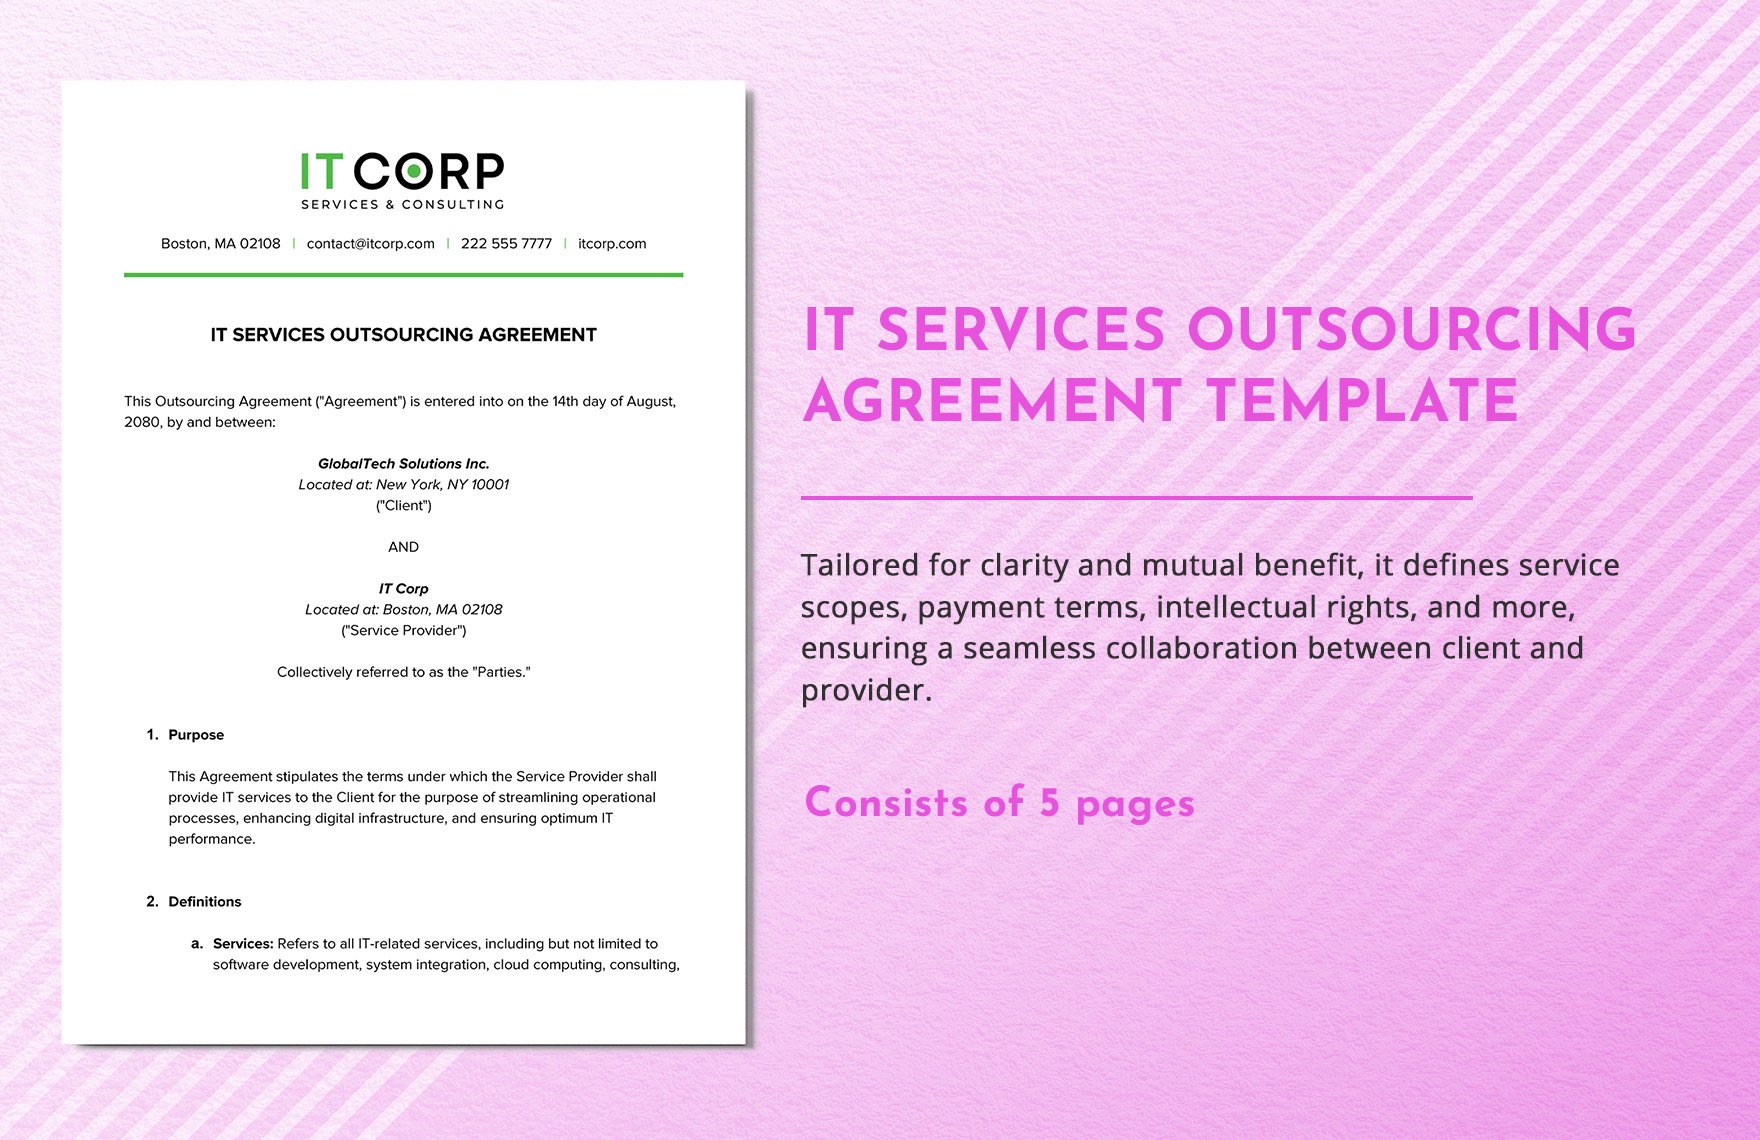 IT Services Outsourcing Agreement Template